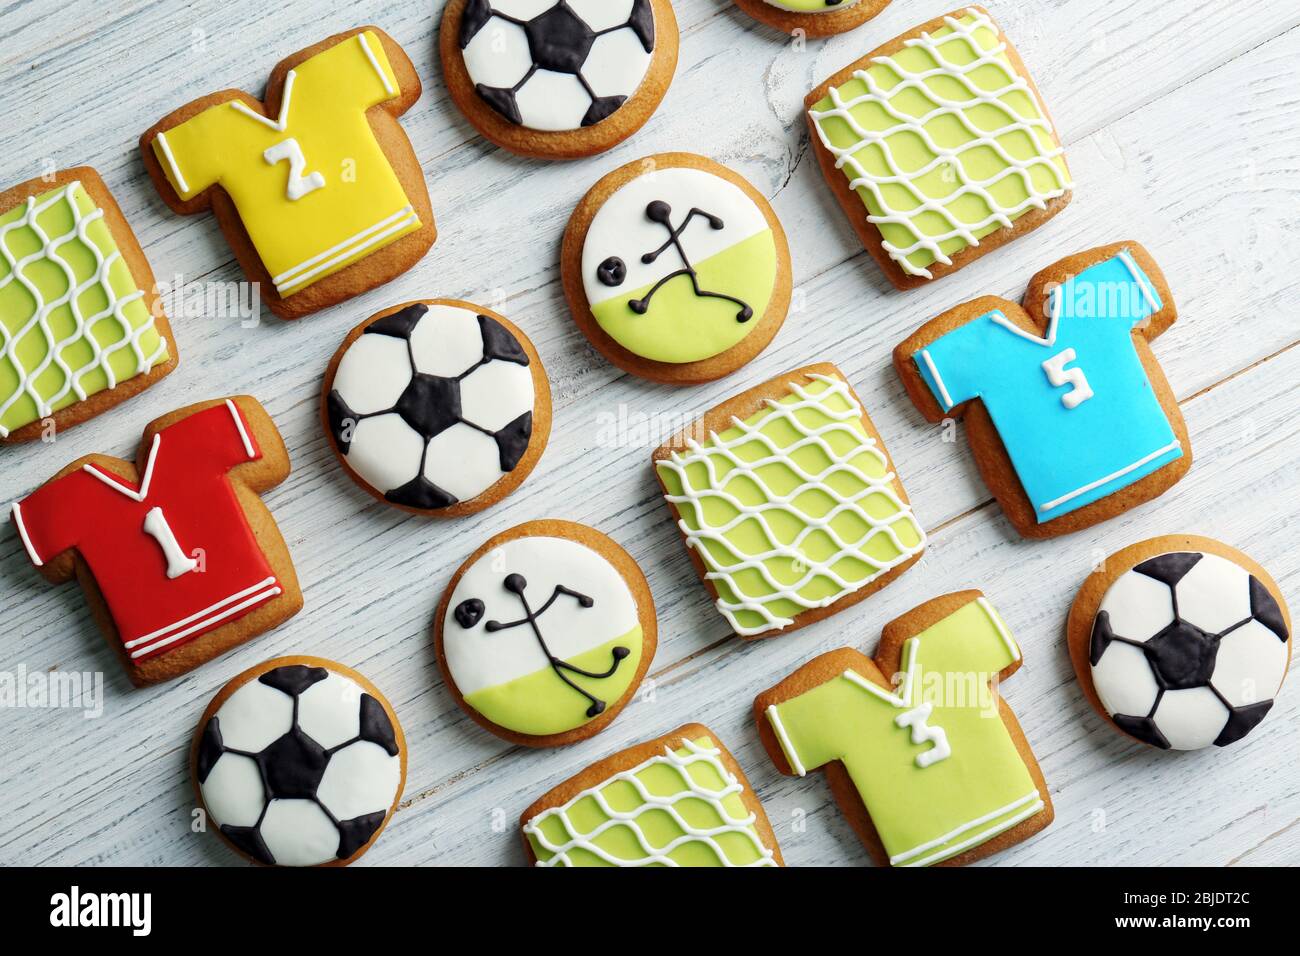 Delicious gingerbread cookies decorated with football signs on white wooden background Stock Photo